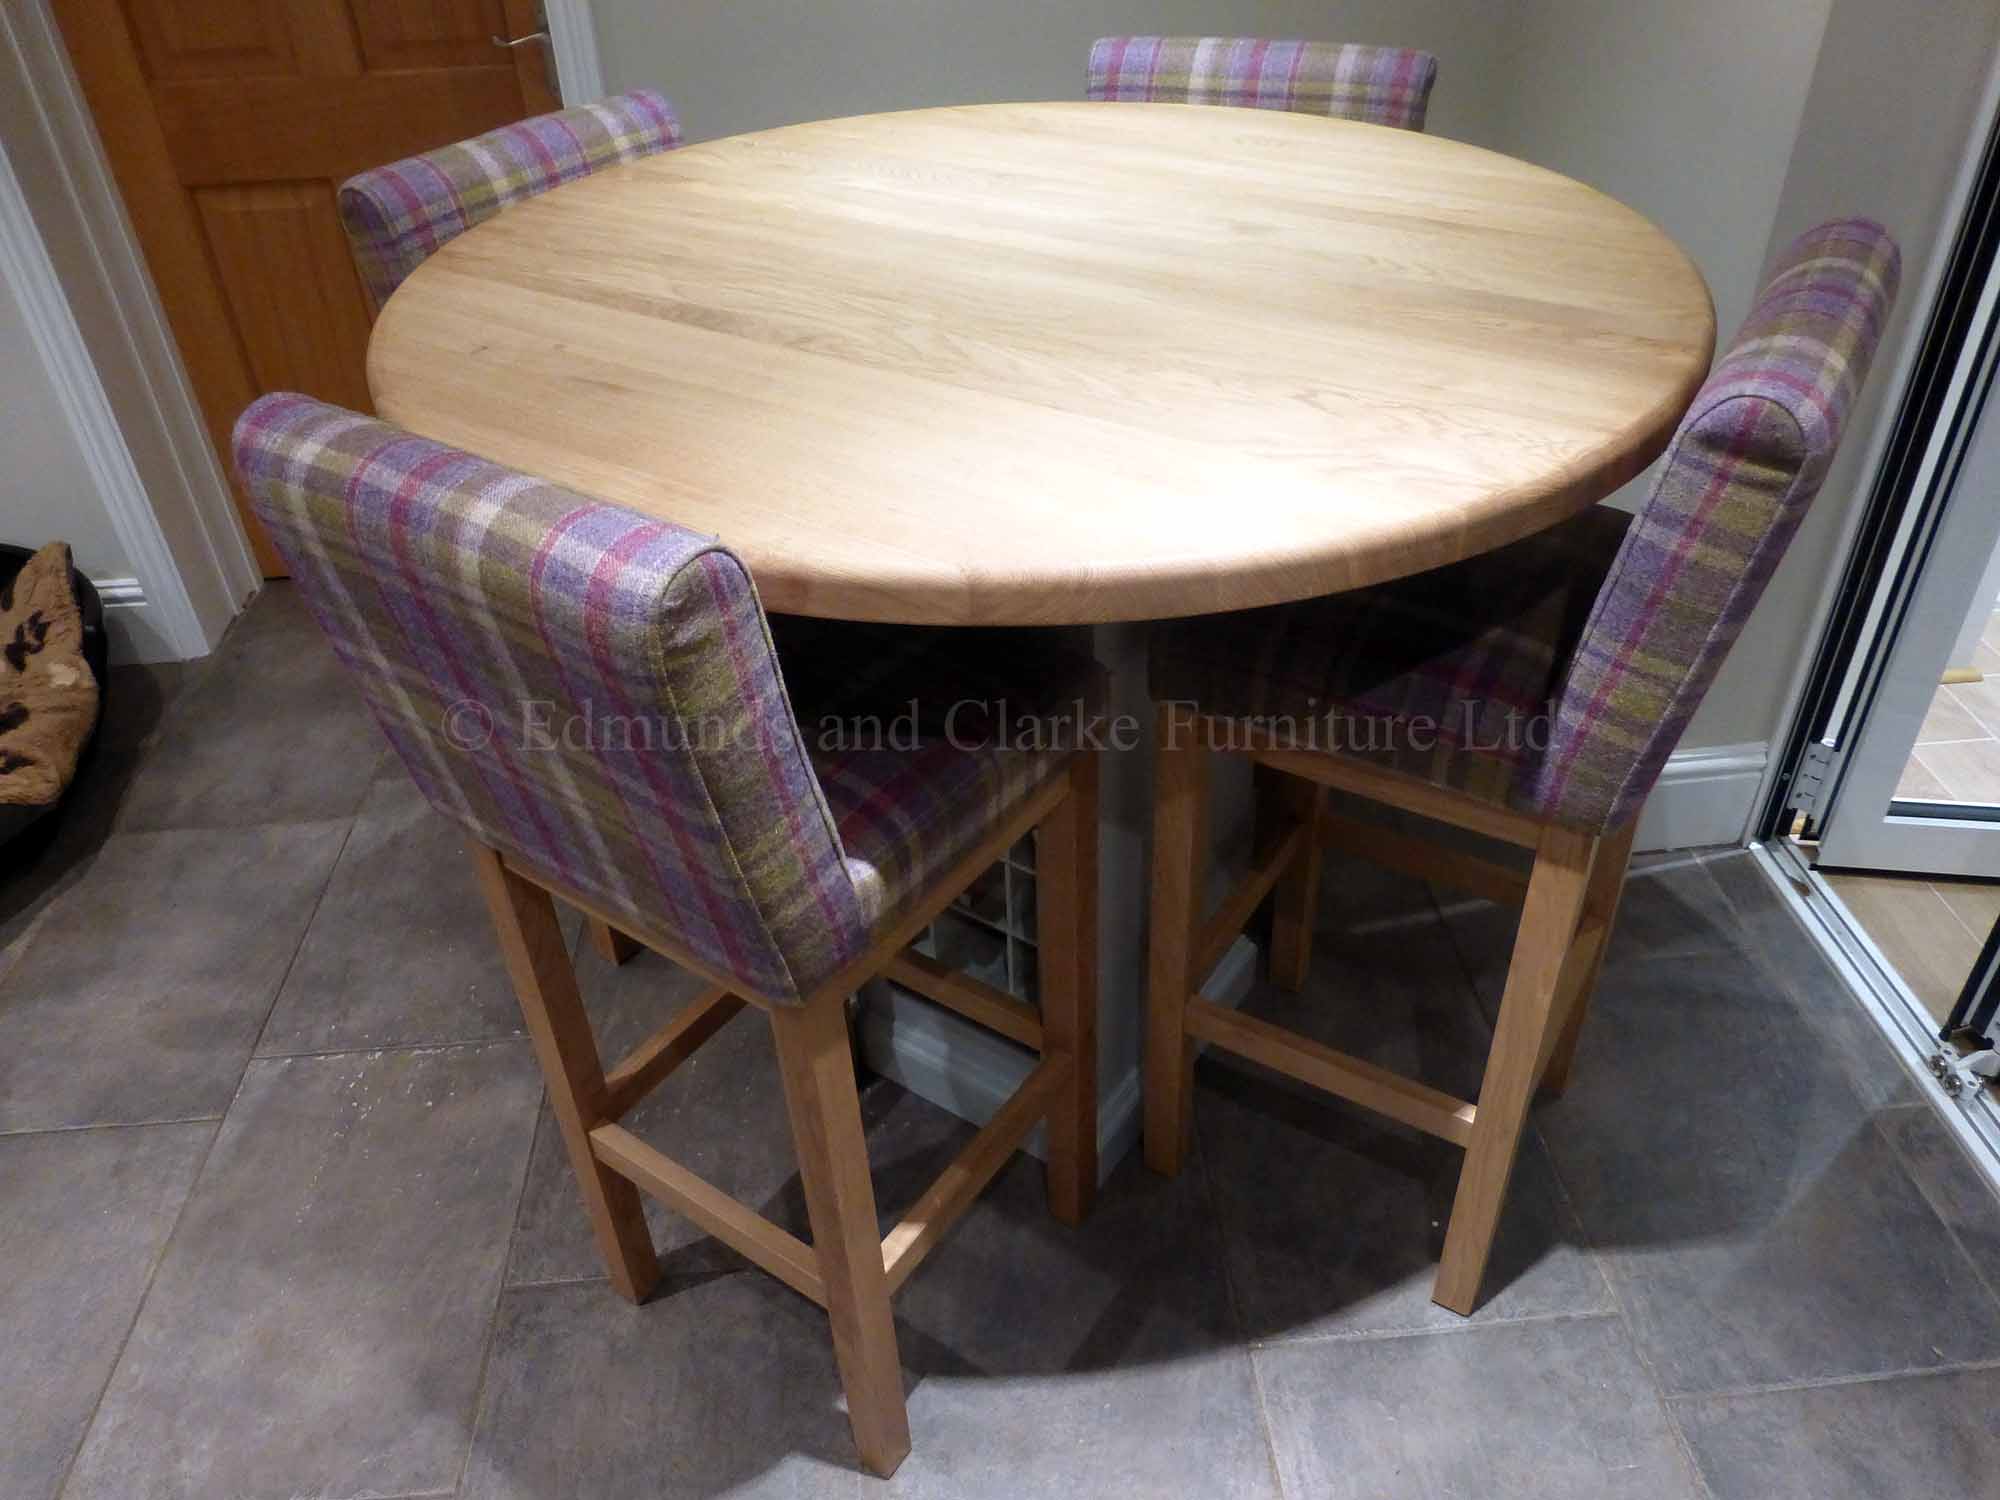 Round made to measure kitchen island with central wine rack pedestal